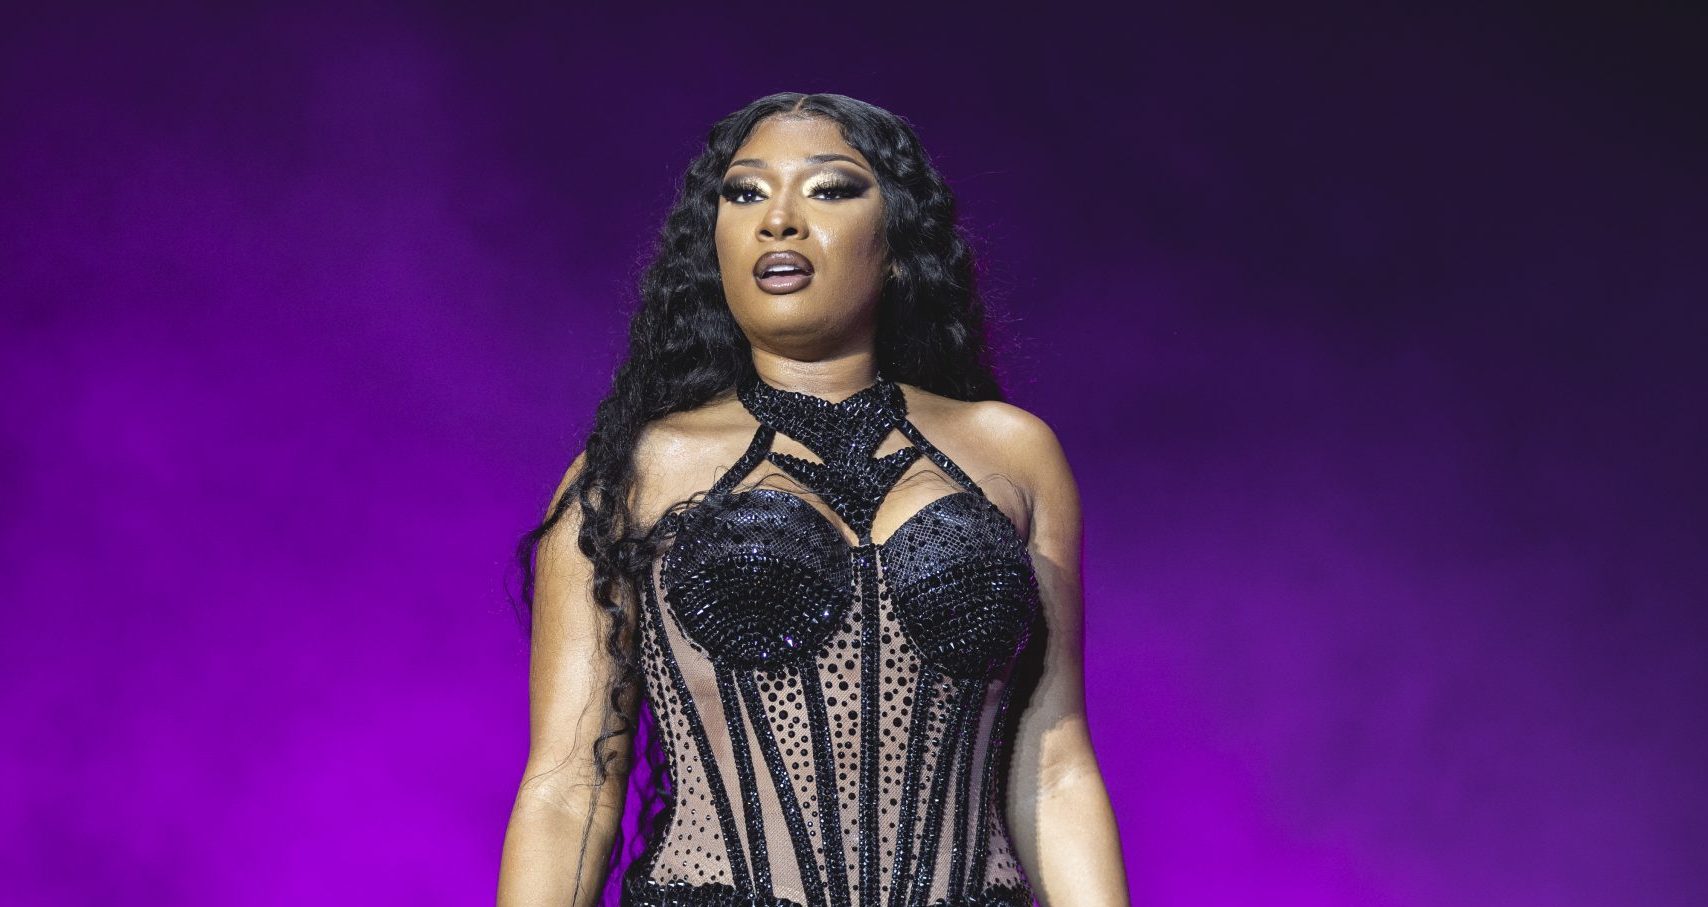 Megan Thee Stallion Adds To Her Acting Bag With Recent Appearance On ‘She-Hulk’